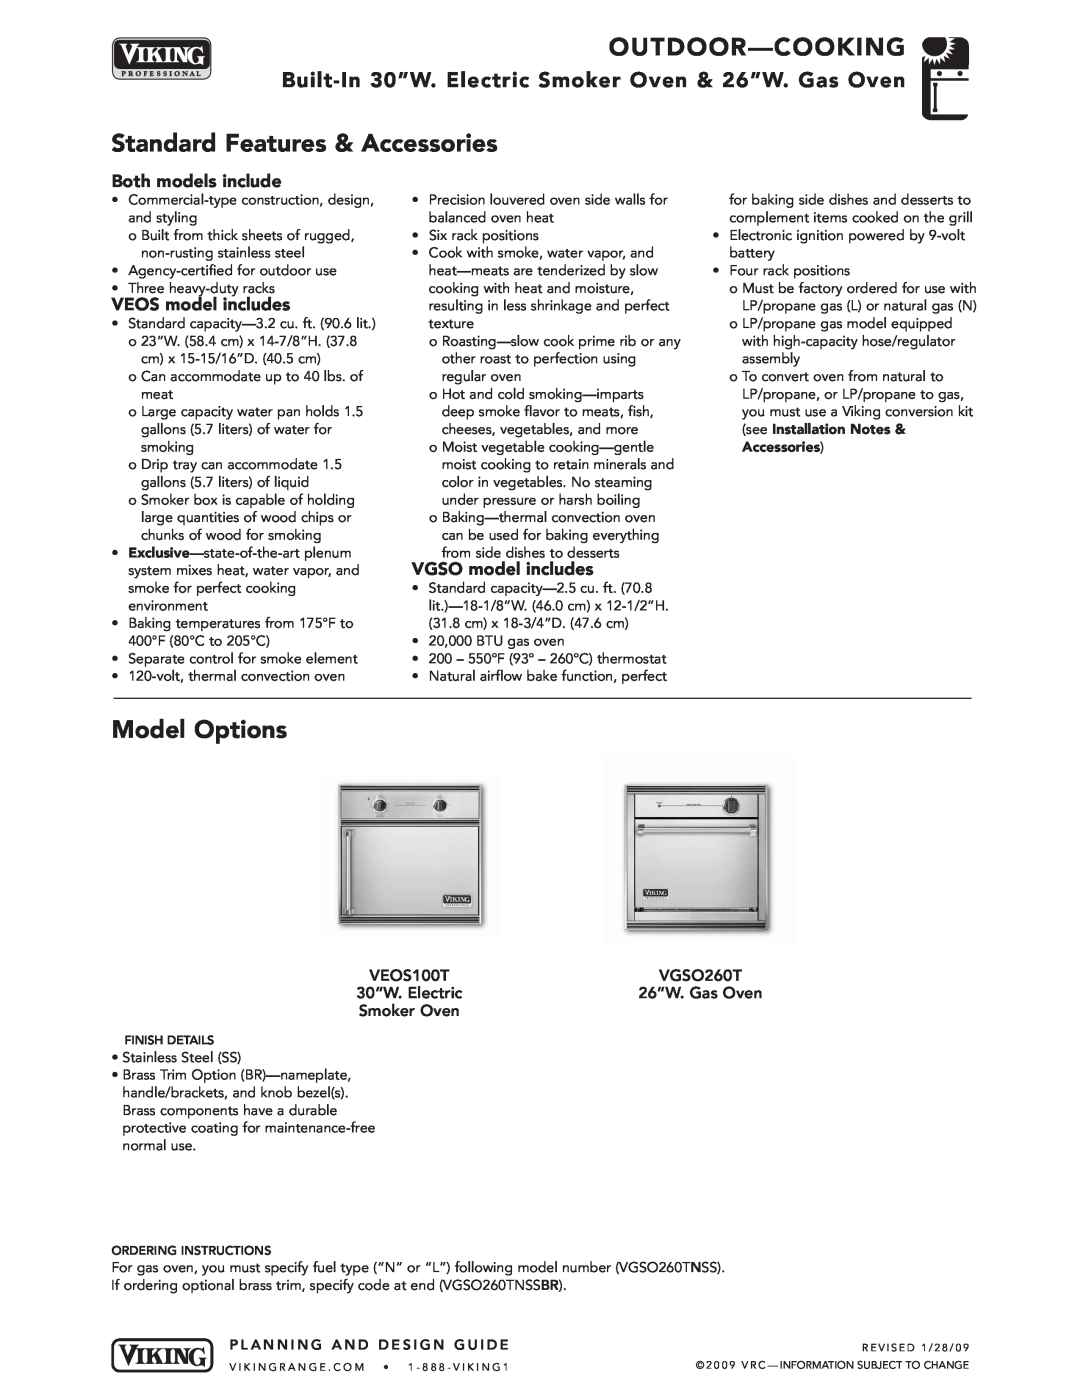 Viking VGBQ3002T1NSS manual Built-In 30”W. Electric Smoker Oven & 26”W. Gas Oven, Both models include, VEOS model includes 